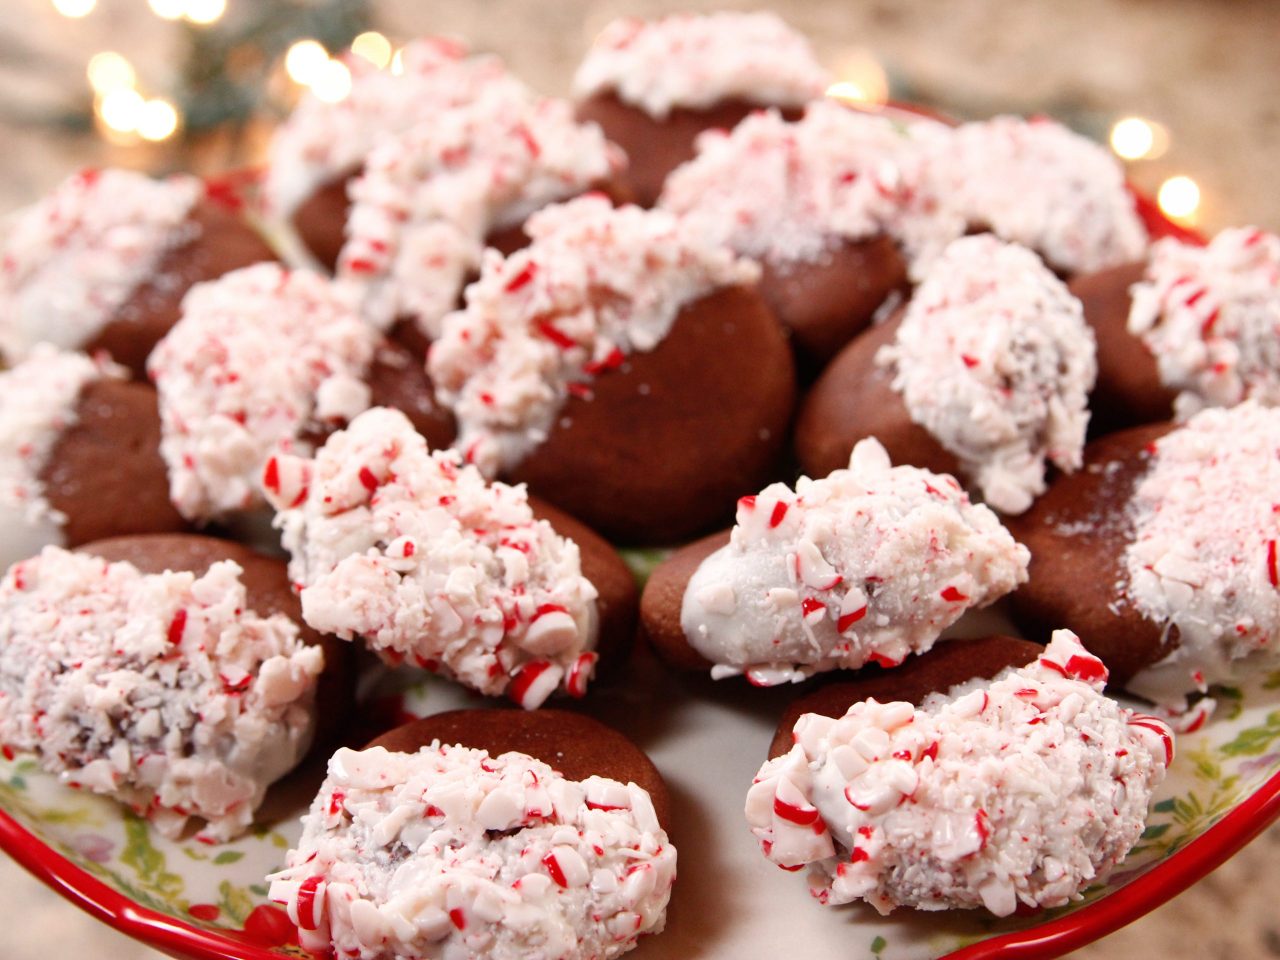 Ree Drummond's Chocolate Candy Cane Cookies